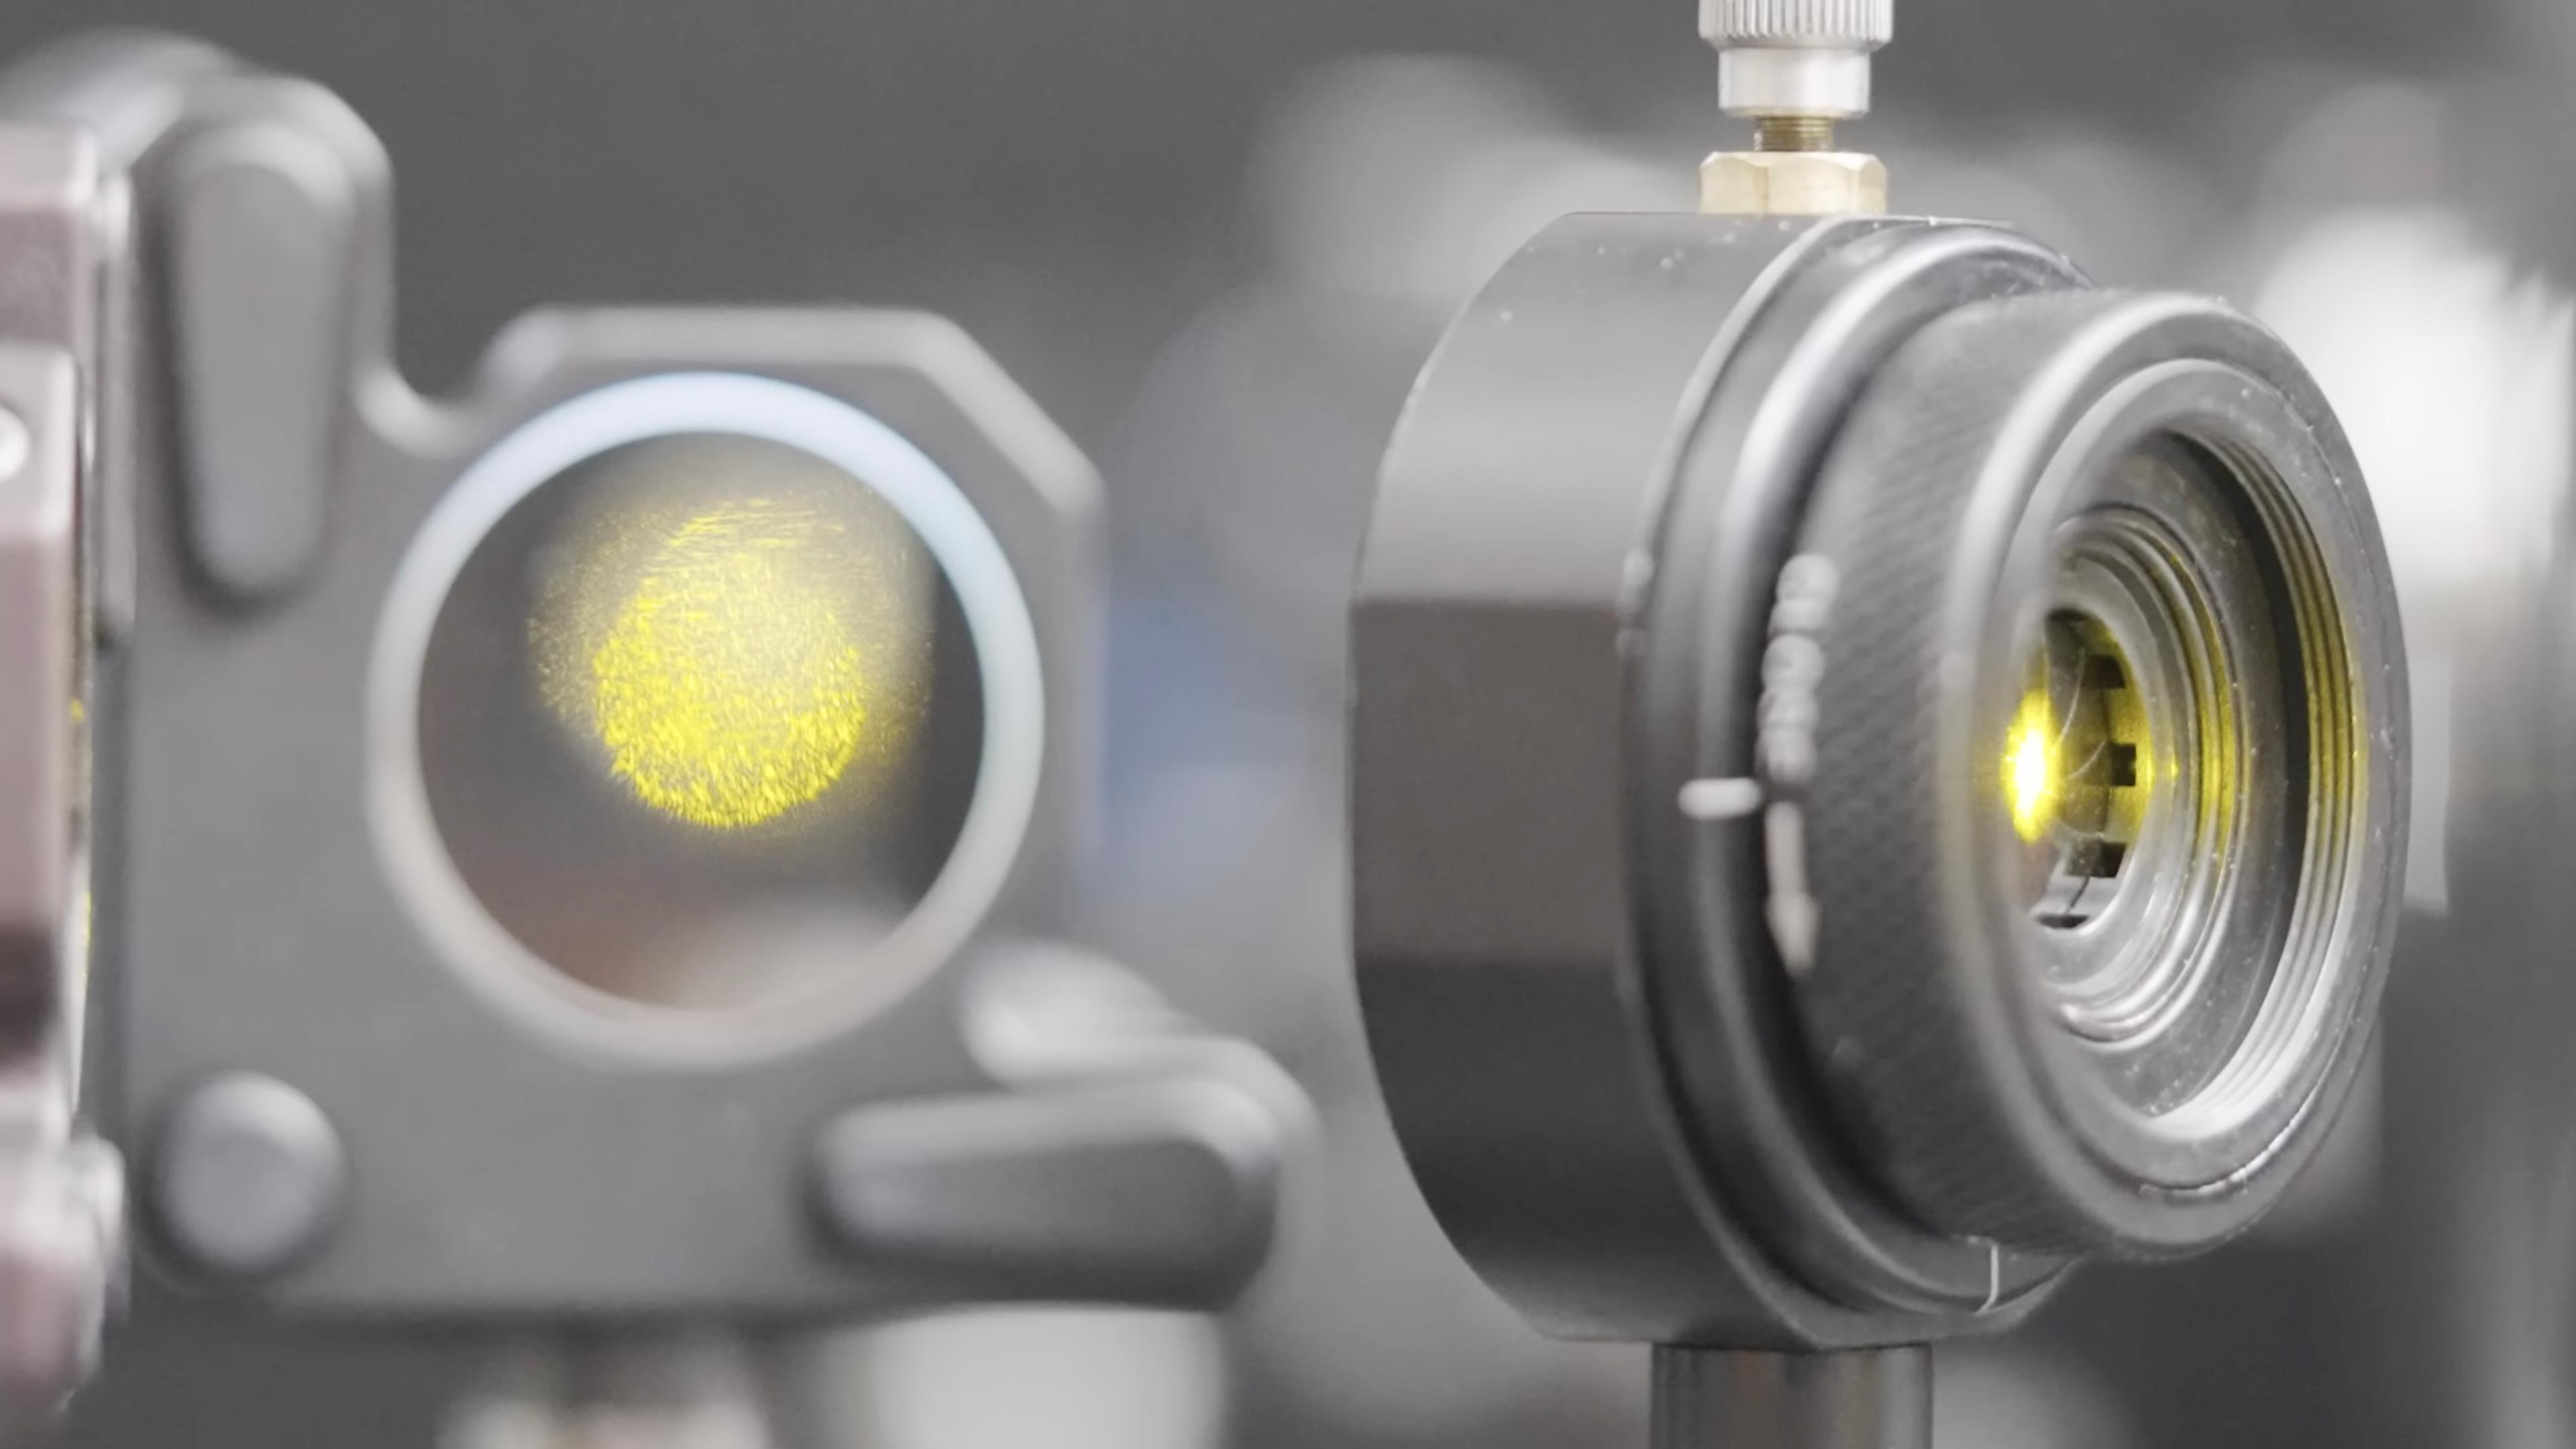 Close-up of two black optical devices with visible yellow light inside the lenses, set against a blurry background.